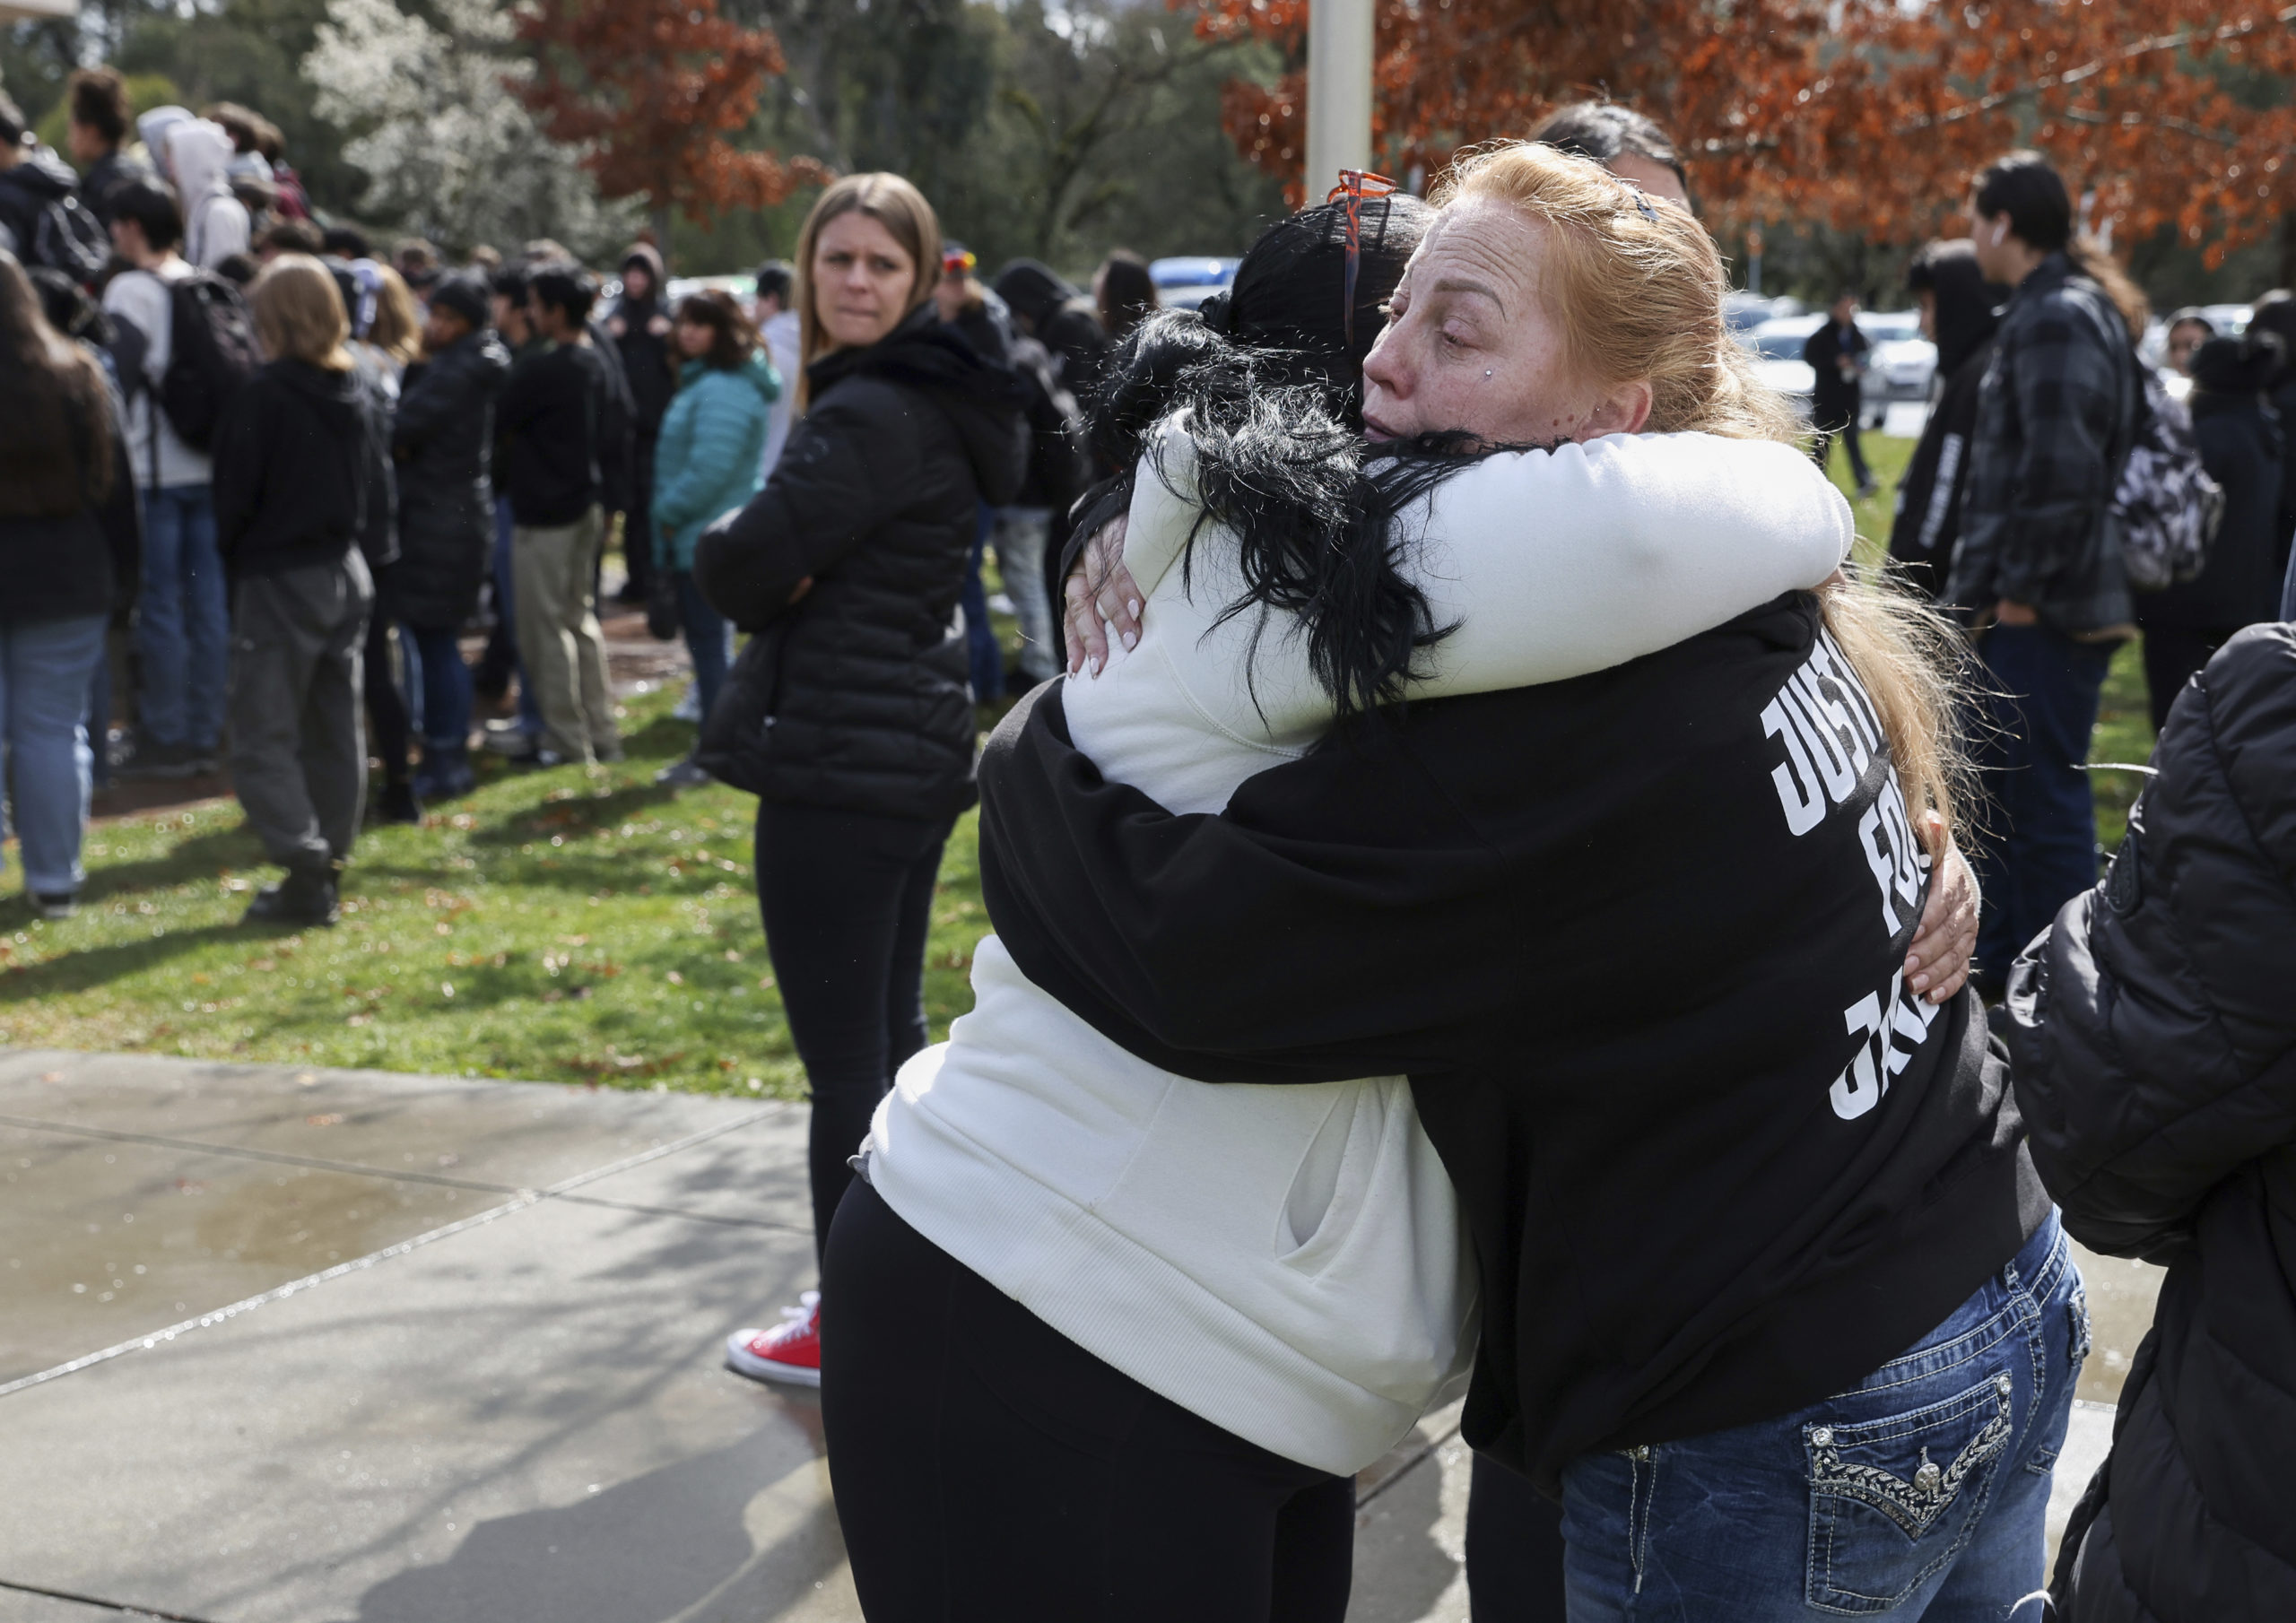 Misty Lenwell, mother of Jayden Pienta, receives a hug after speaking to students during a walkout ...